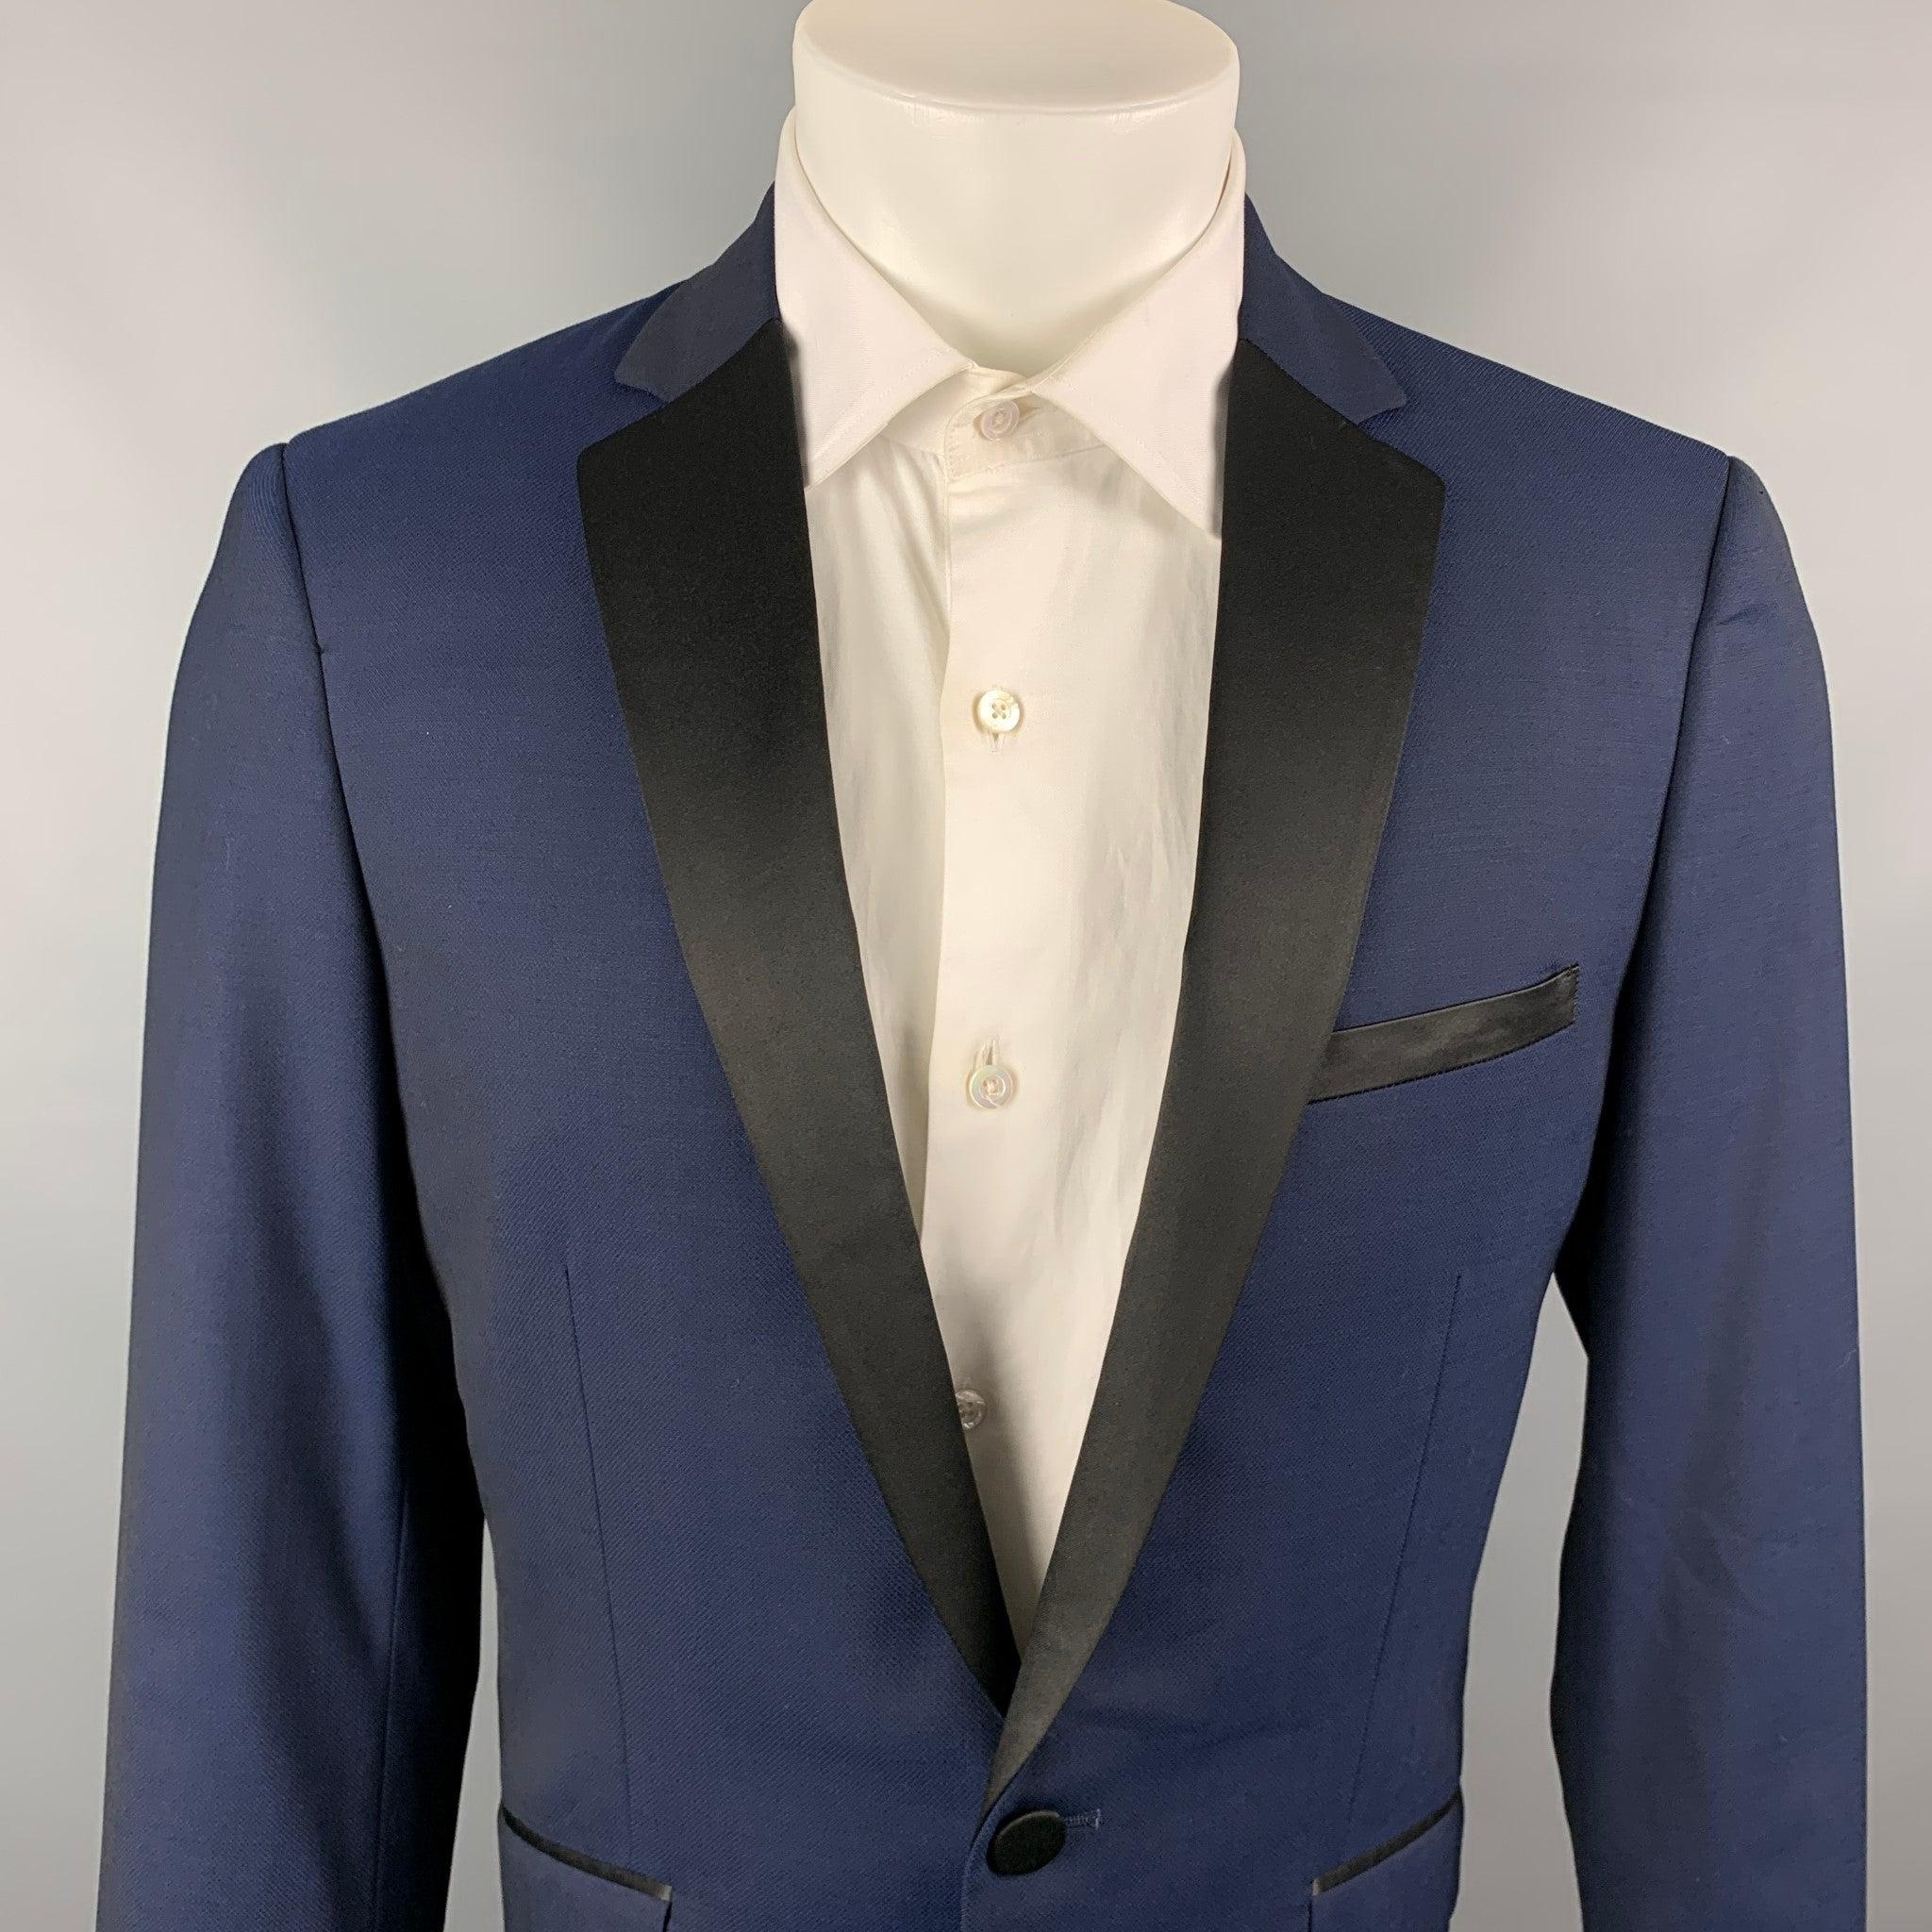 THEORY sport coat comes in a navy & black wool with a full liner featuring a notch lapel, flap pockets, and a single button closure. Very Good Pre-Owned Condition. 

Marked:   40 Regular 

Measurements: 
 
Shoulder: 18 inches  Chest: 40 inches 